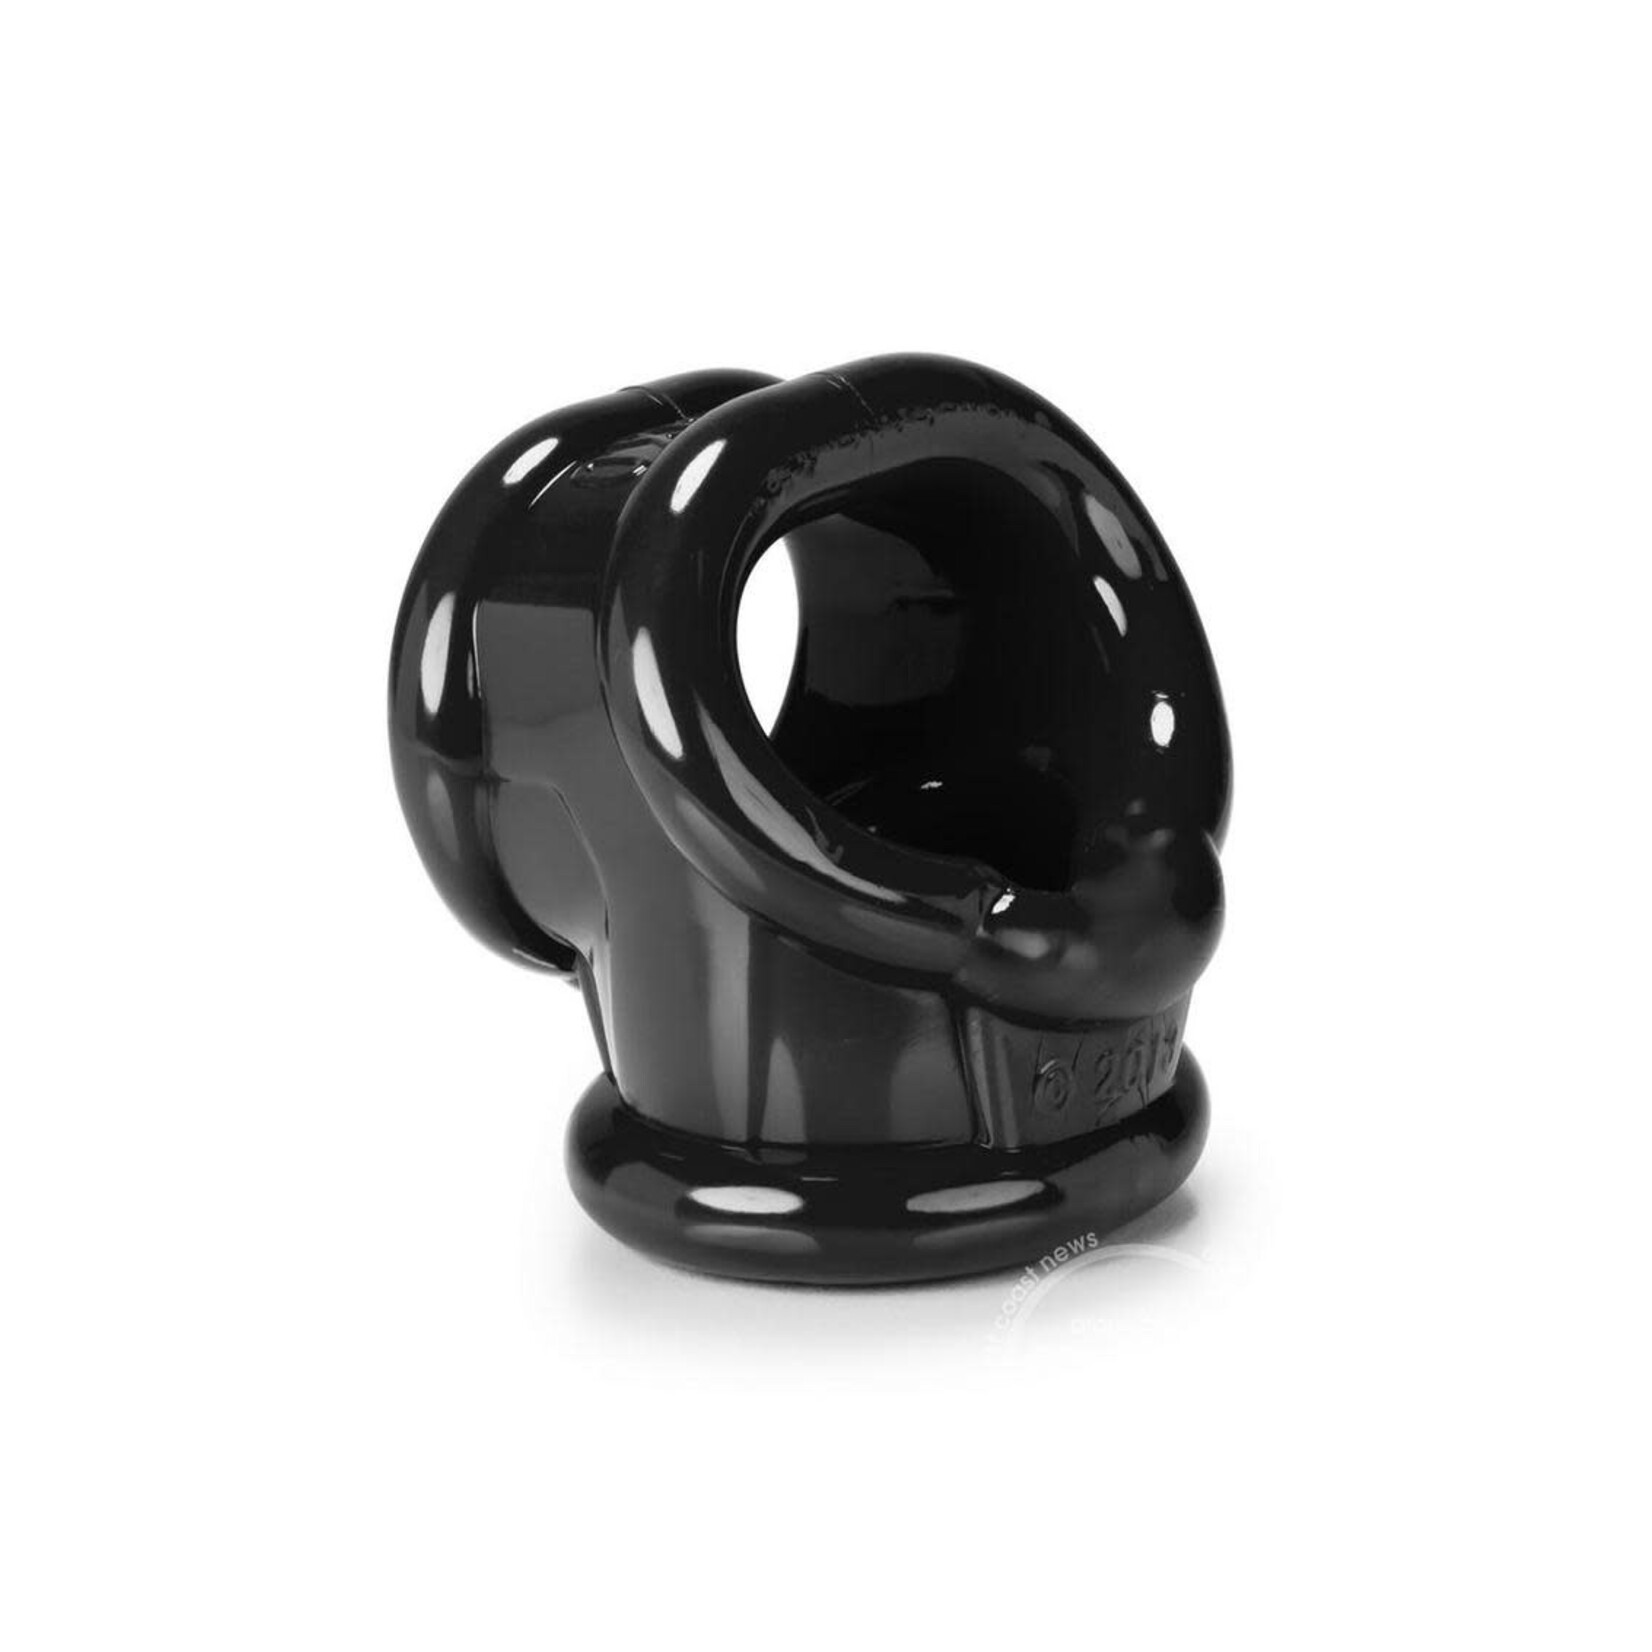 Oxballs Cocksling-2 Cock And Ball Ring - Black